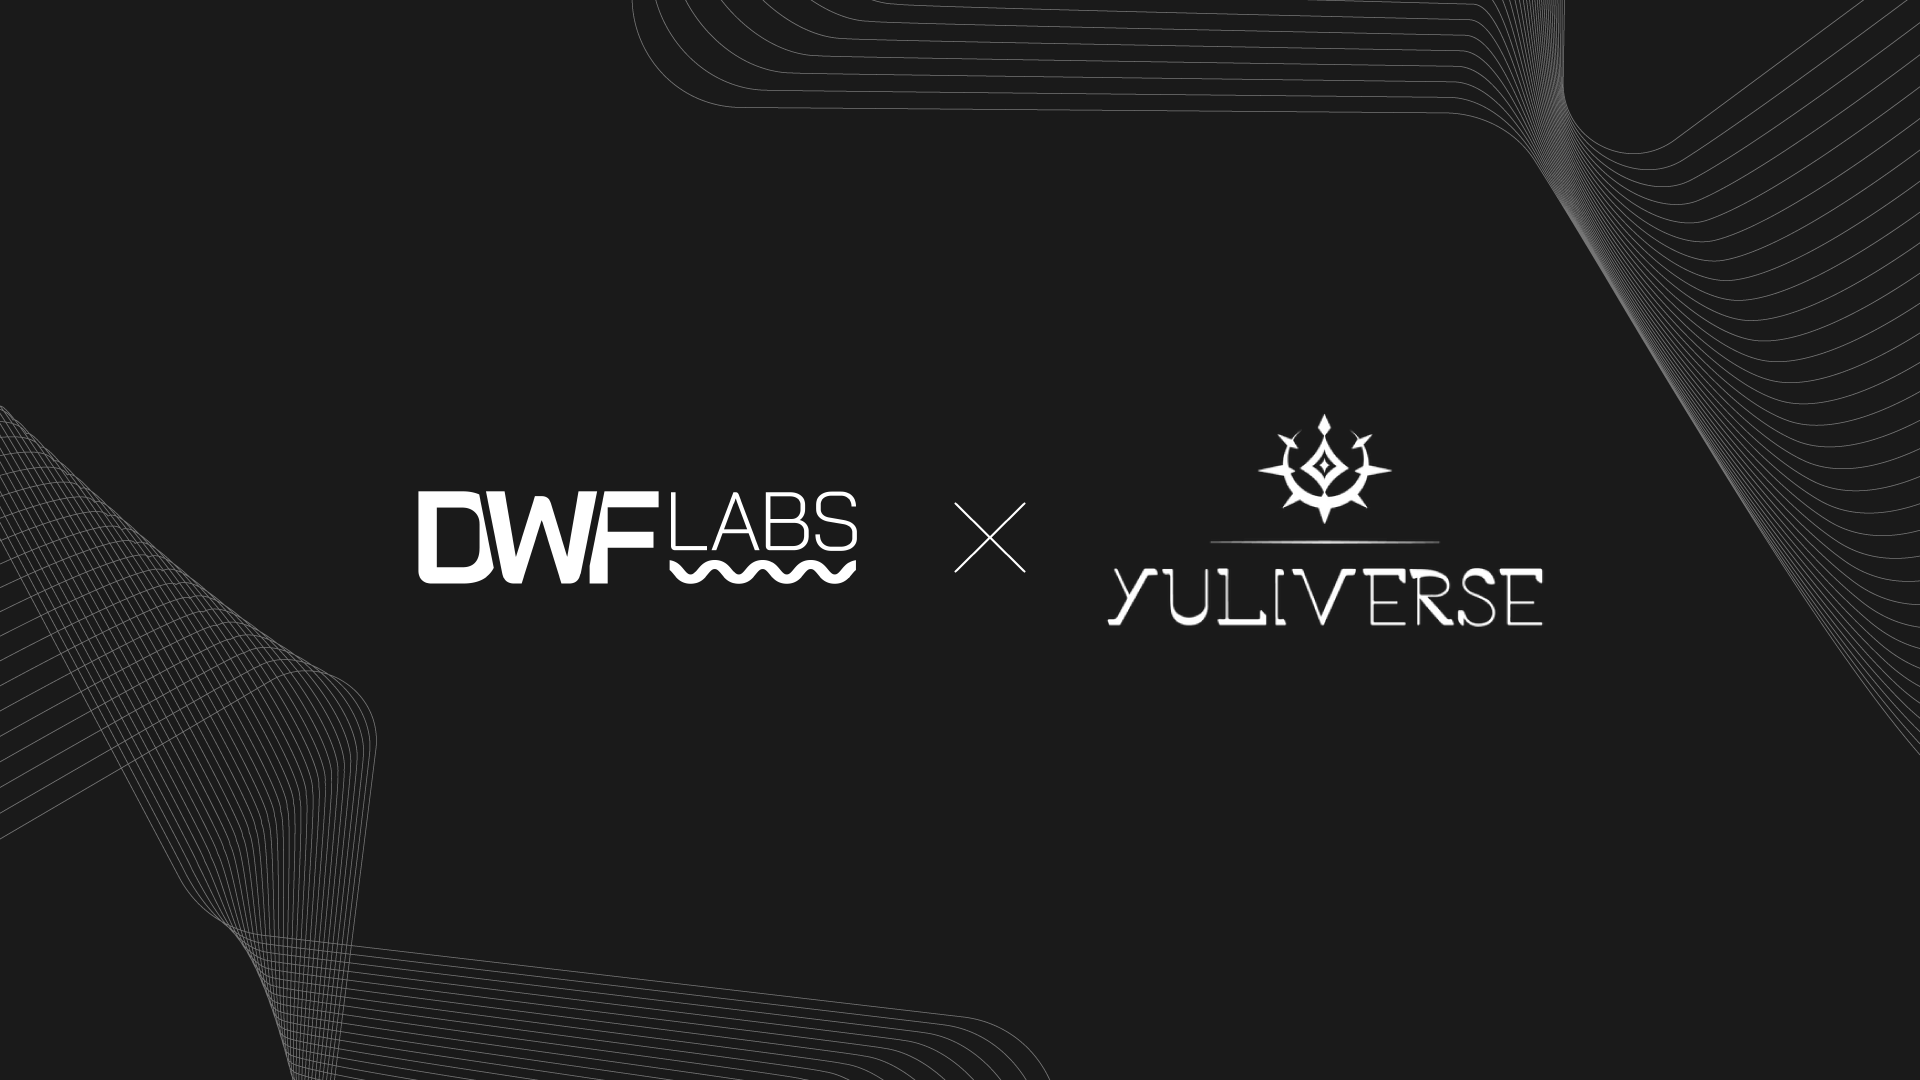 Yuliverse Partners with DWF Labs for New Investment Collaboration